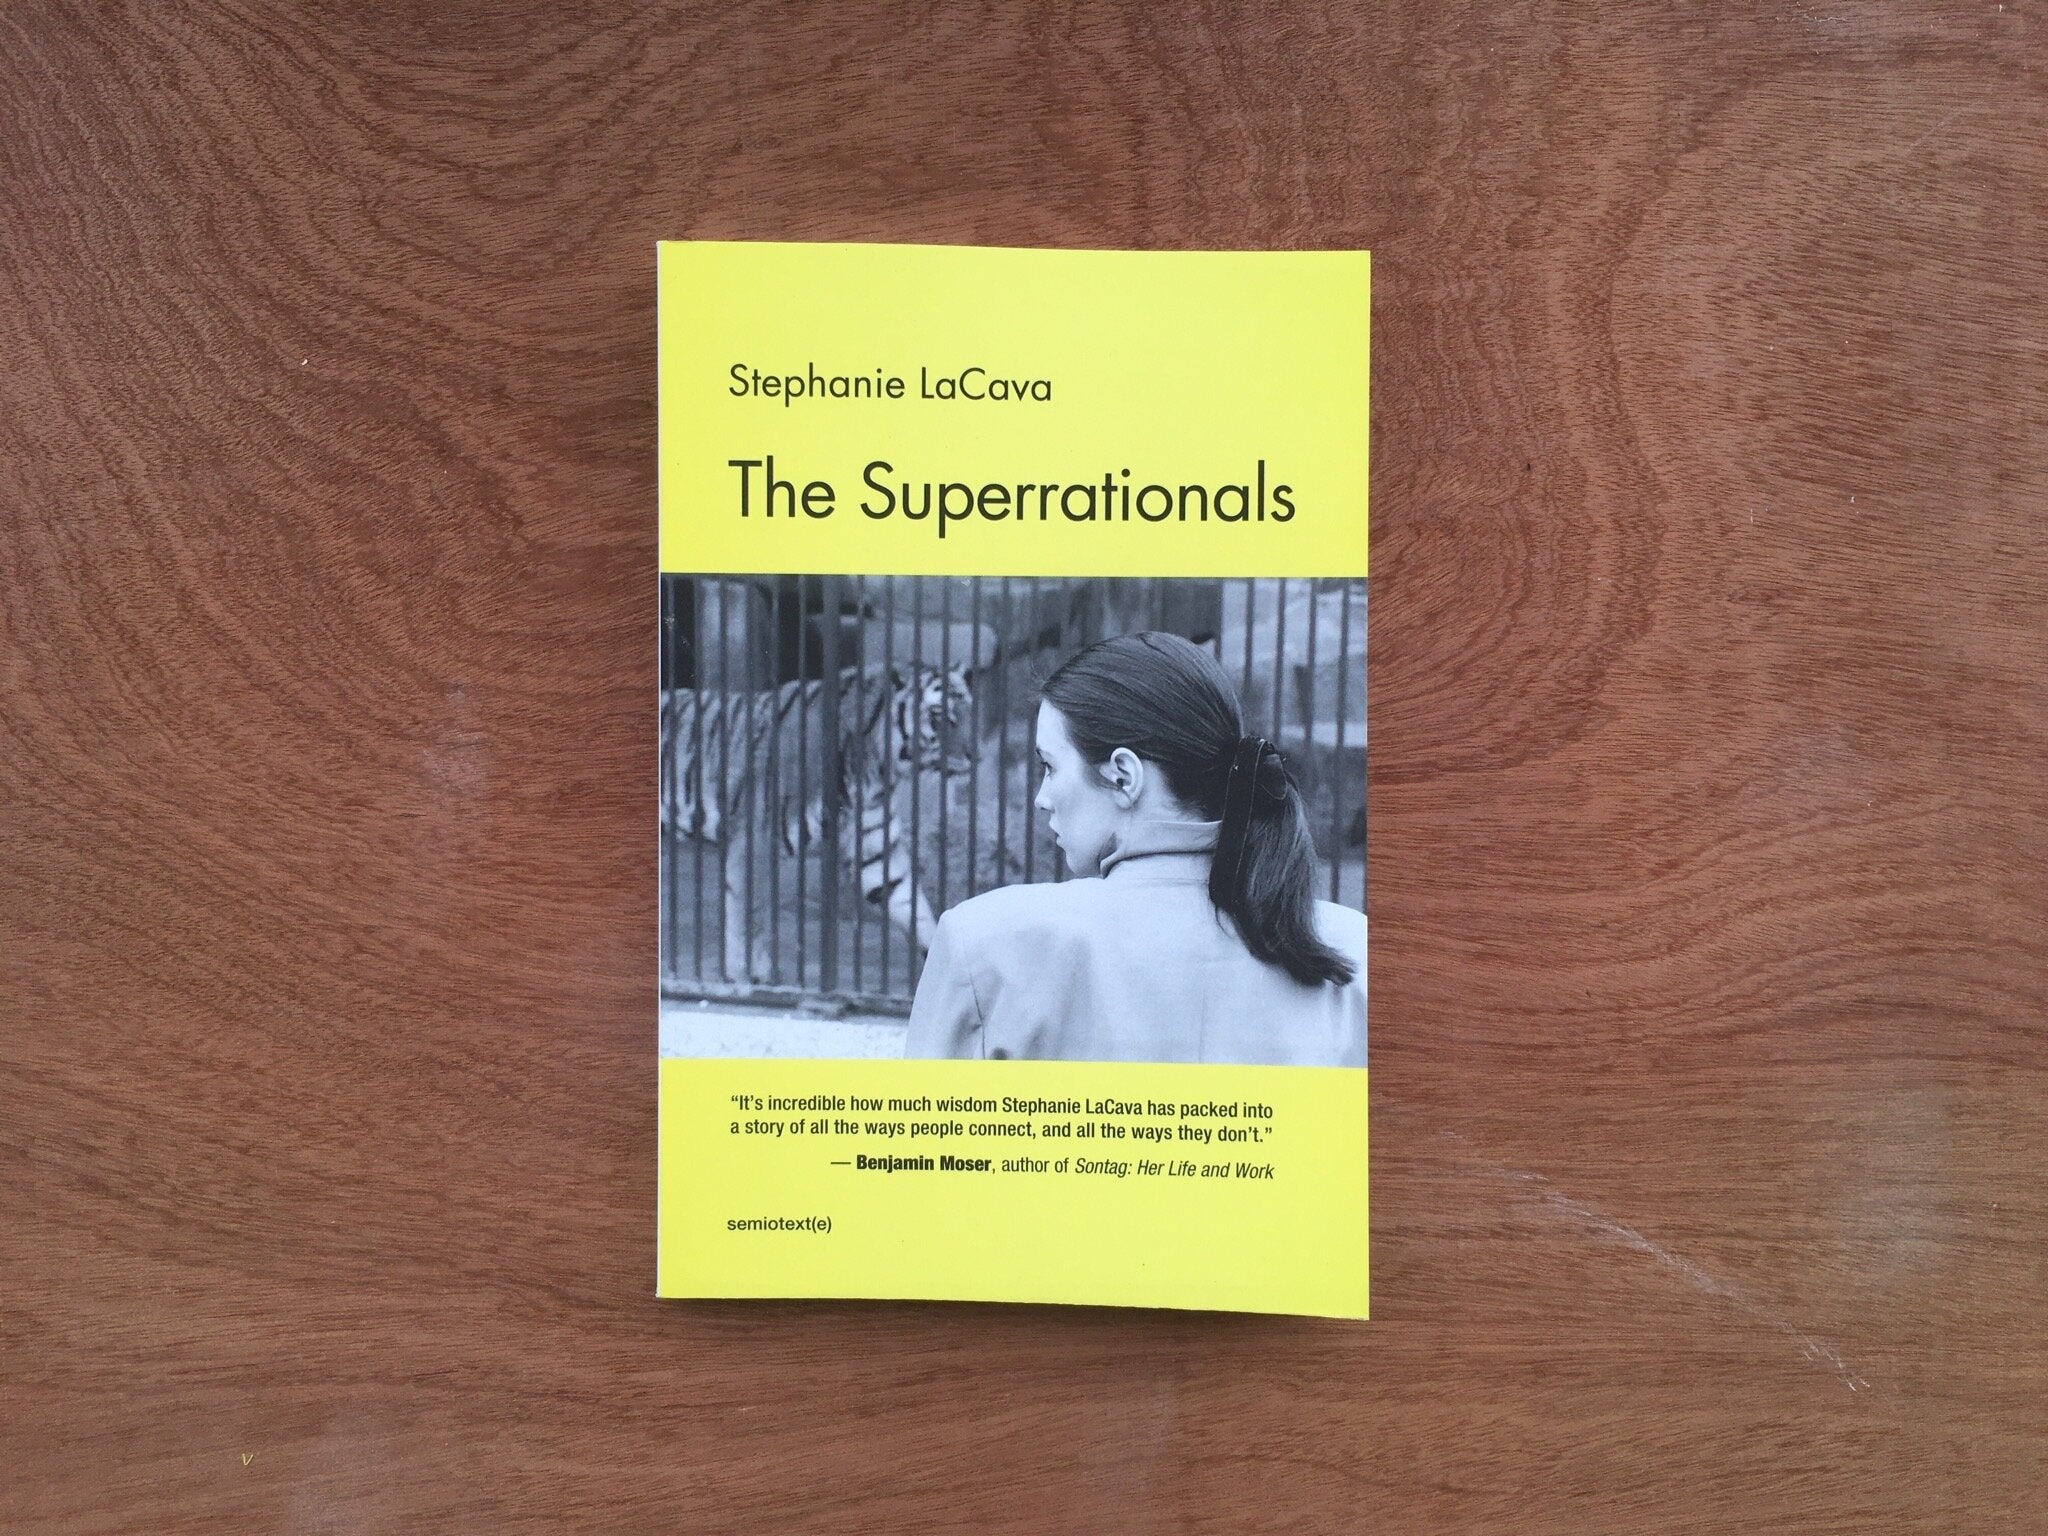 THE SUPERRATIONALS by Stephanie LaCava